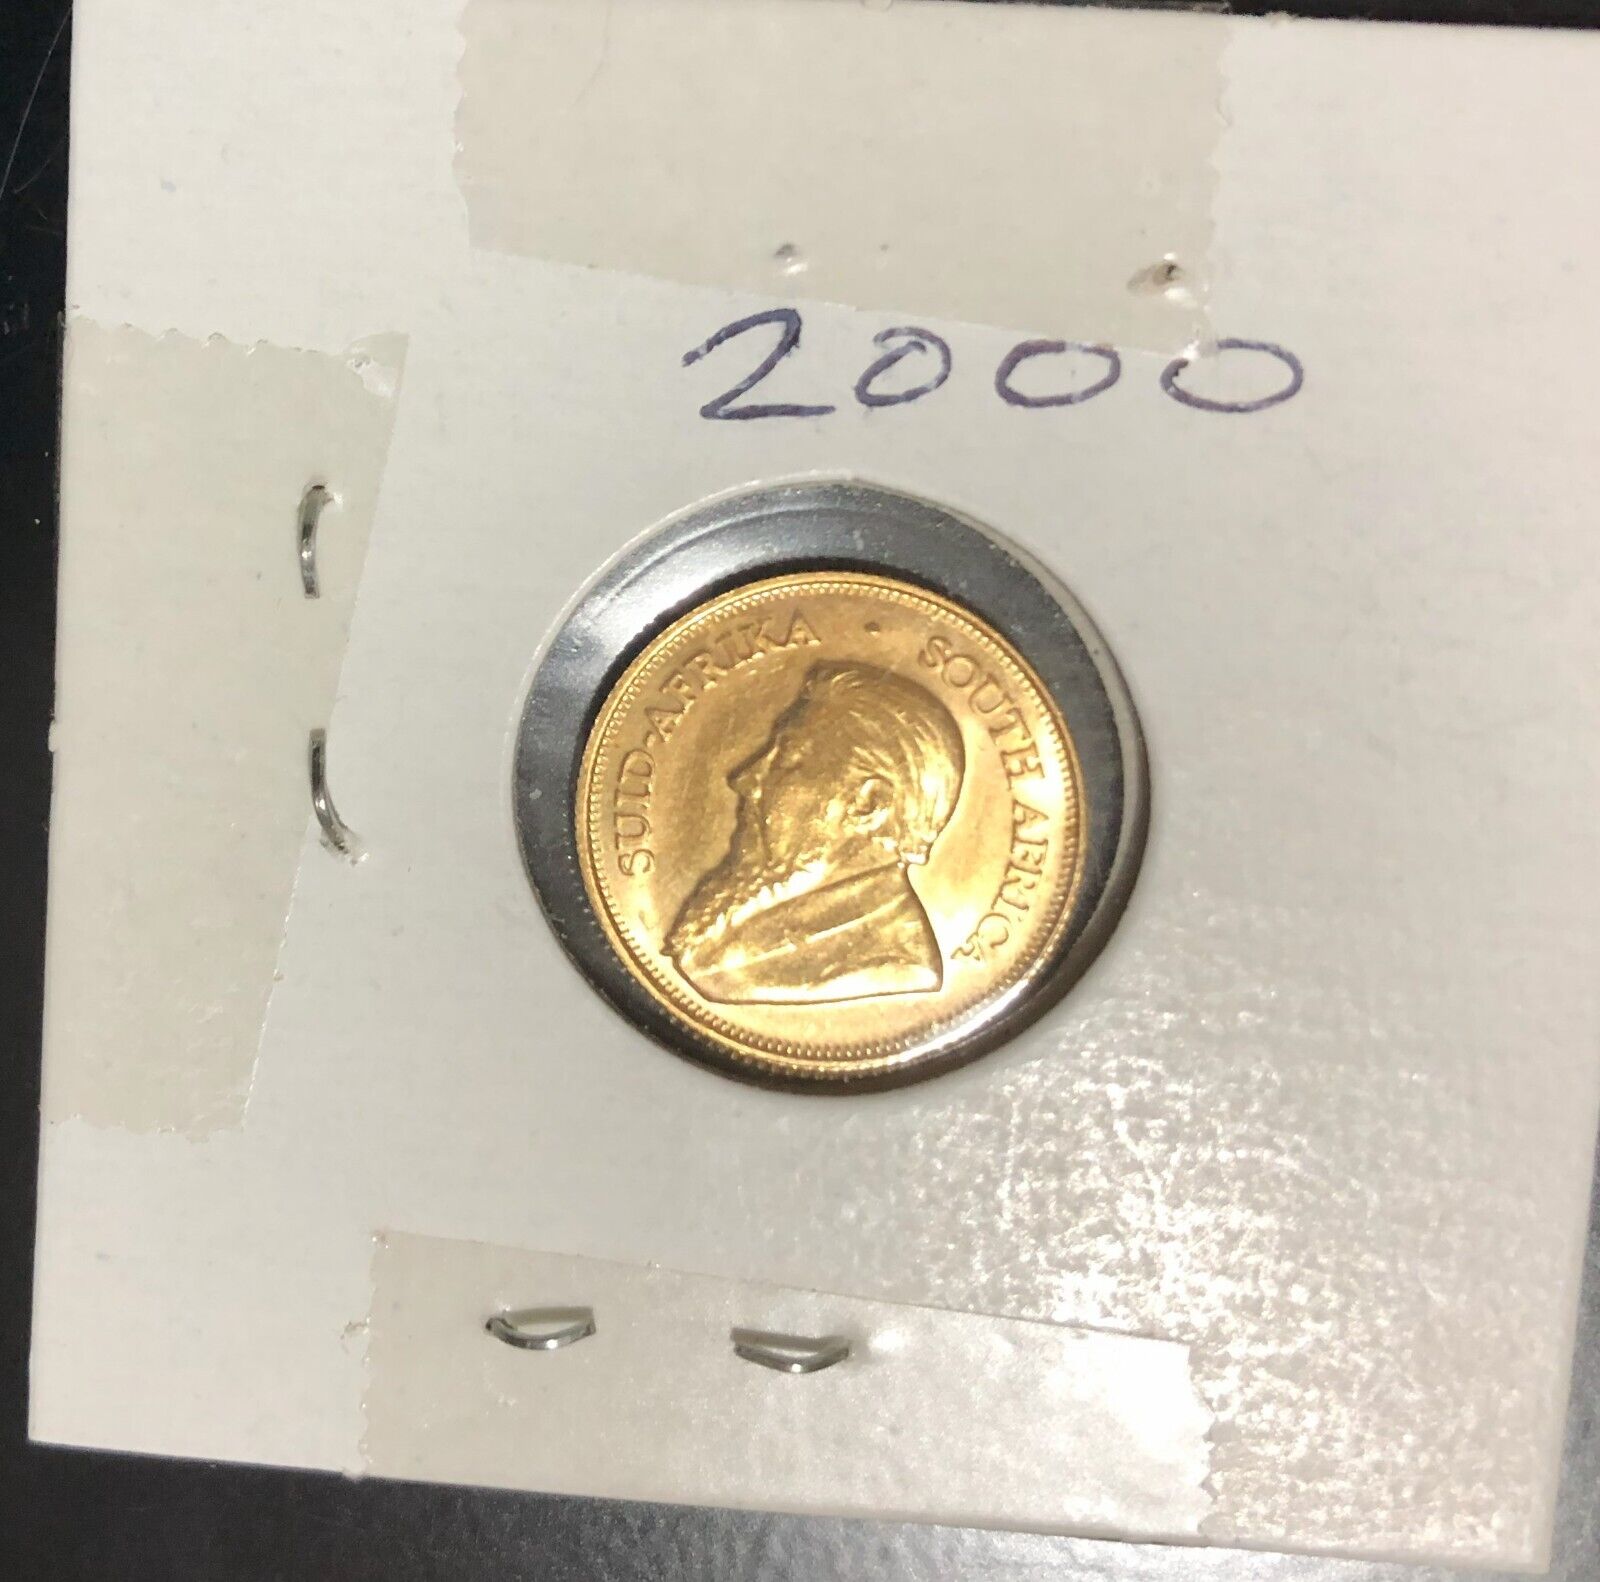 2000 Krugerand 1/10th Oz Gold Coin South Africa